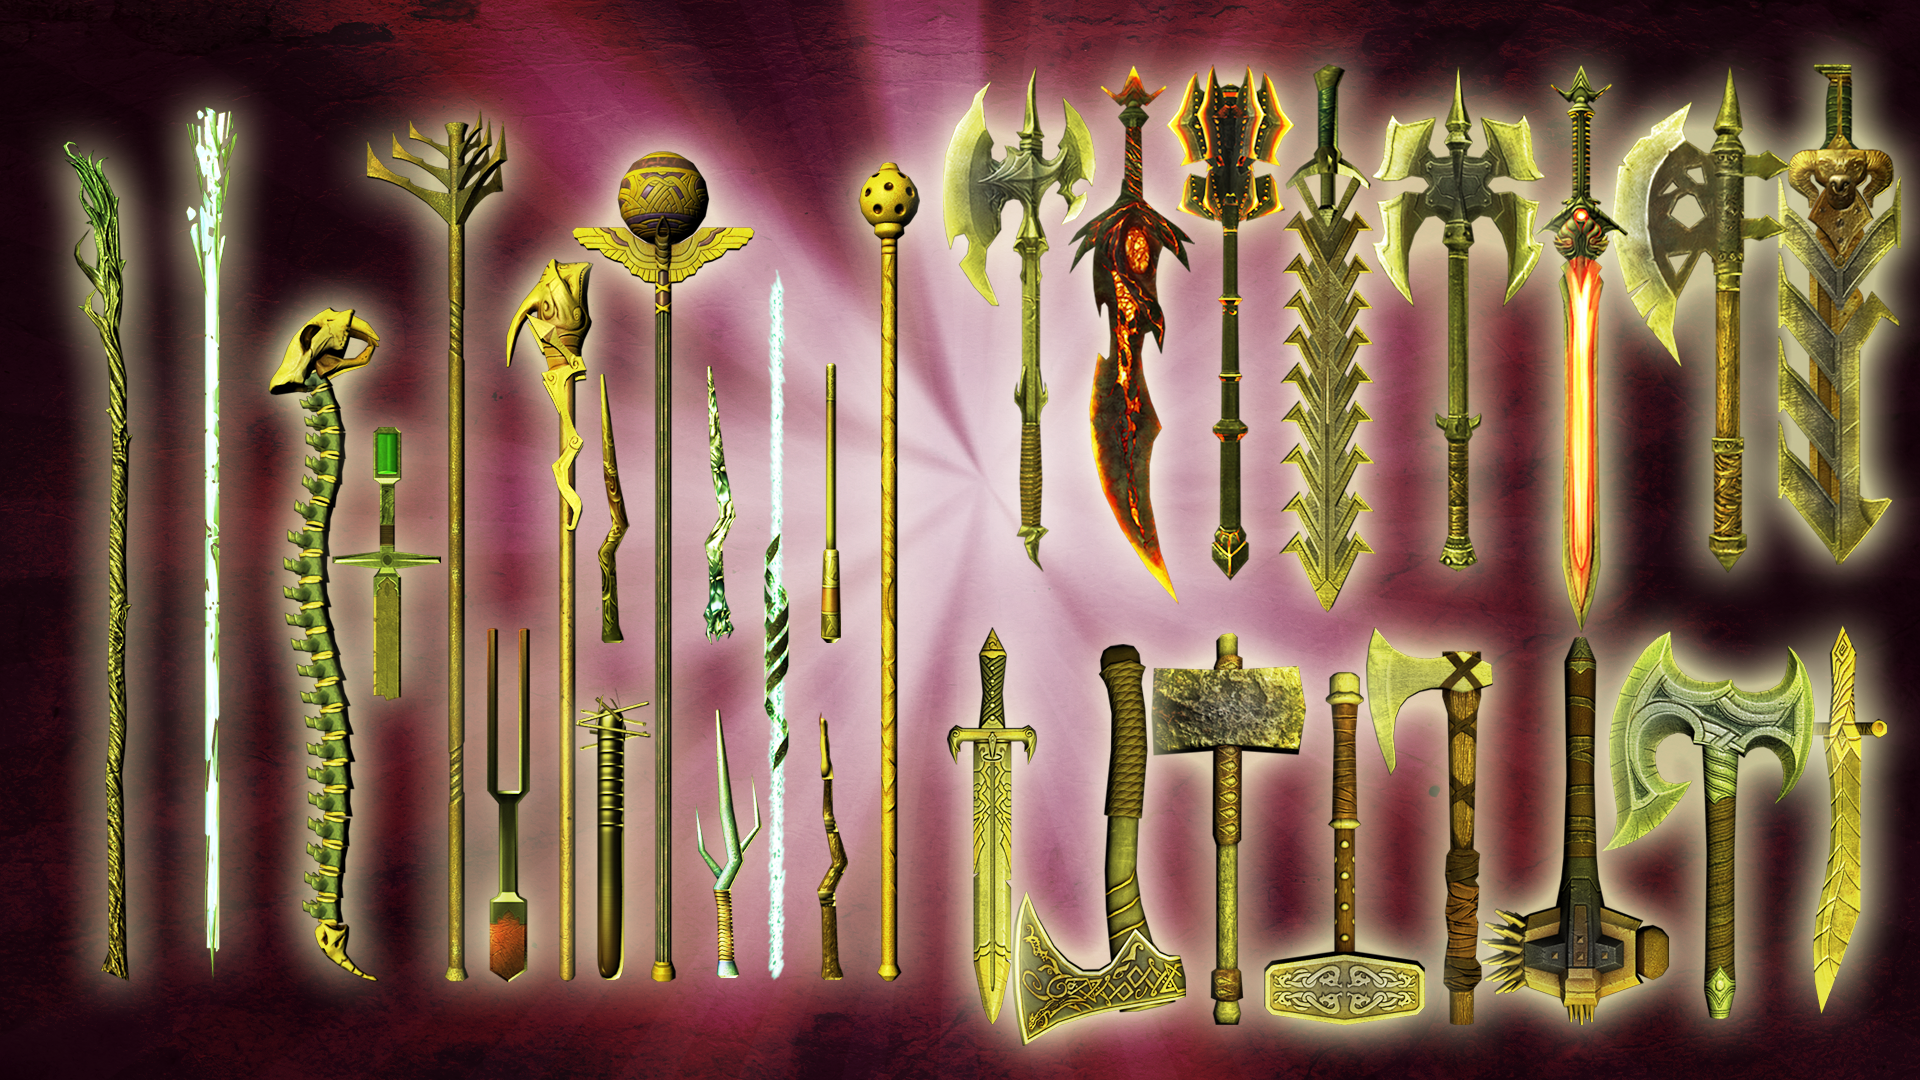 Icon for Weapon Collector